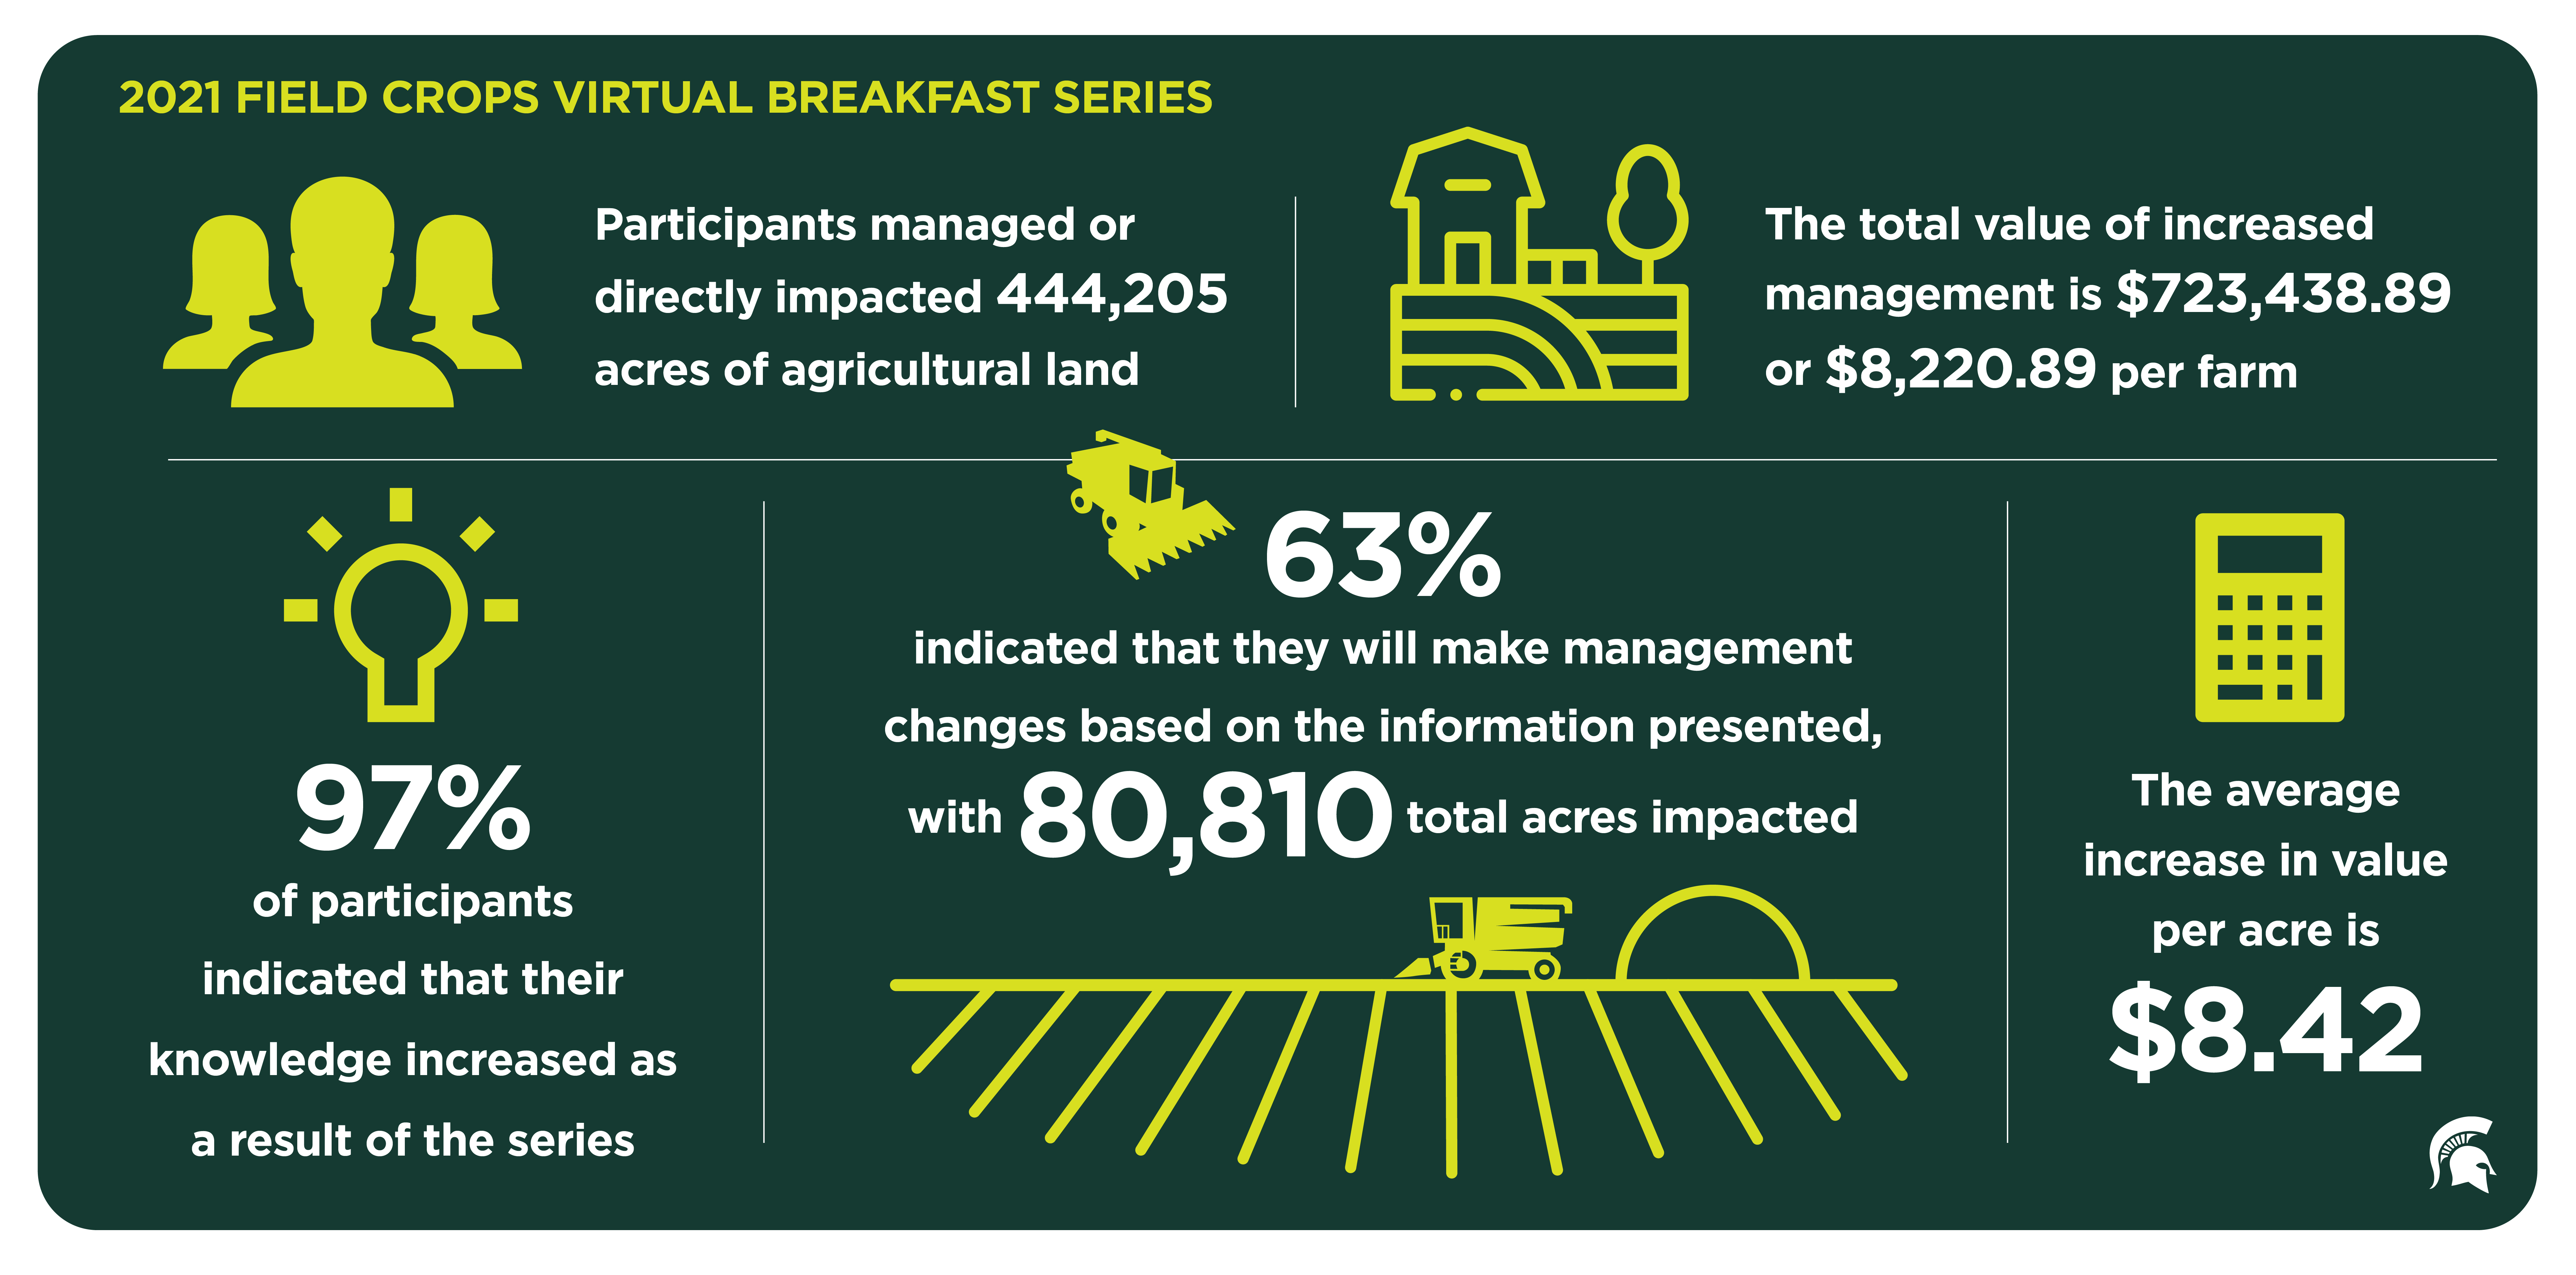 Field crops virtual breakfast events helped Michigan farmers increase the value of their management, knowledge and value per acre.